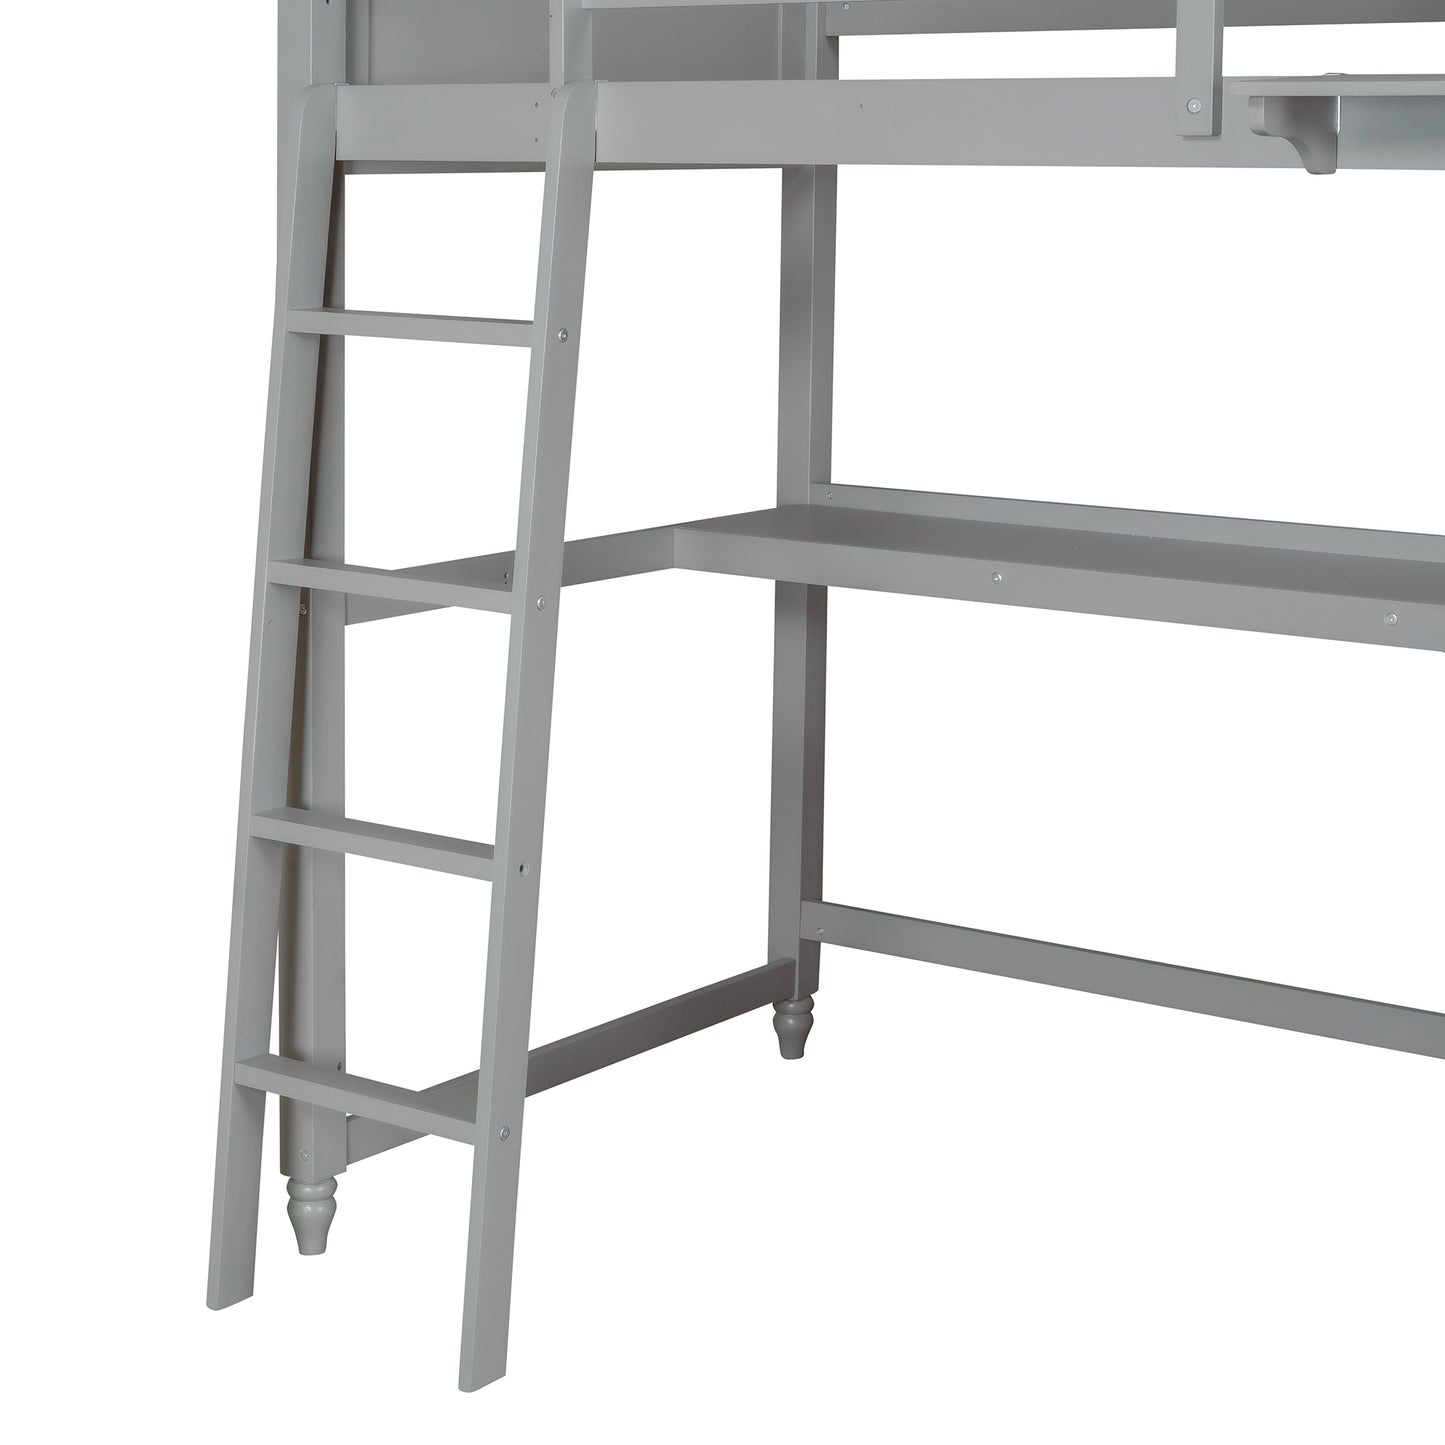 Twin size Loft Bed with Drawers and Desk, Wooden Loft Bed with Shelves - Gray